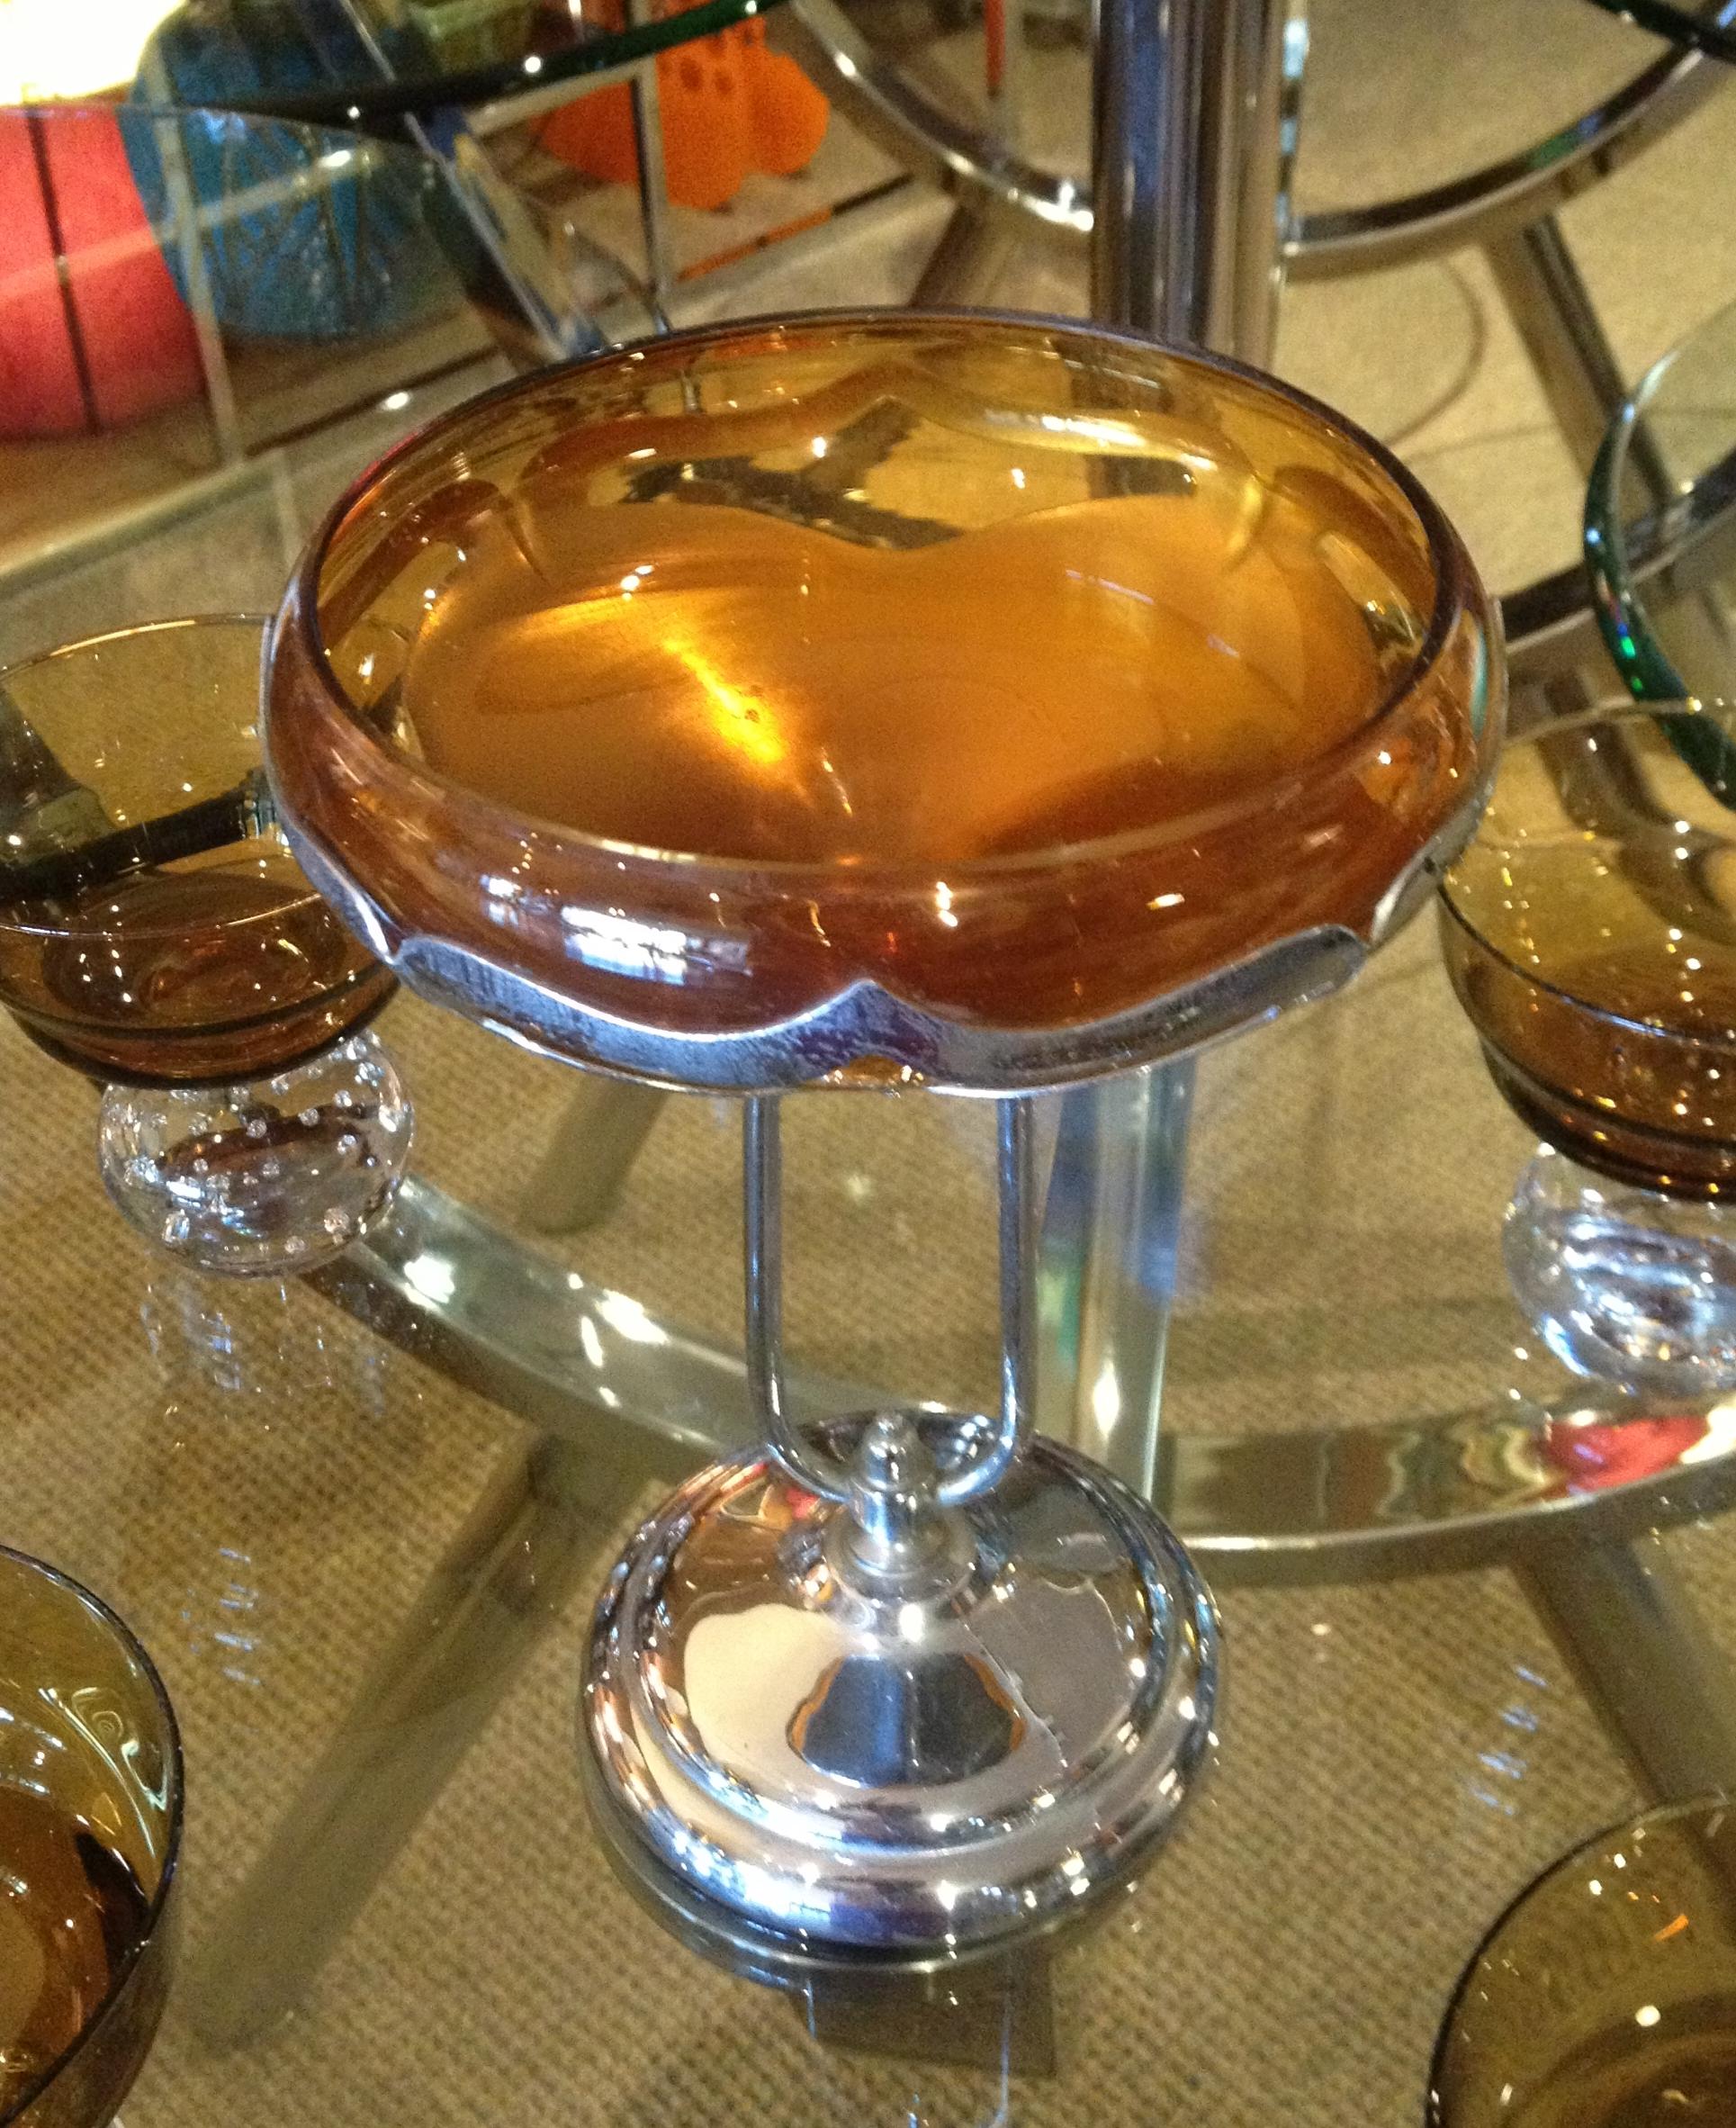 Elegant Art Deco / Hollywood Regency style compote made by Farber Bros., New York, ca. 1940s. Amber colored glass bowl, atop a gracefully curved pedestal, sits inside a chrome overly. A classic Farber Bros. style that is perfect for candy, nuts or